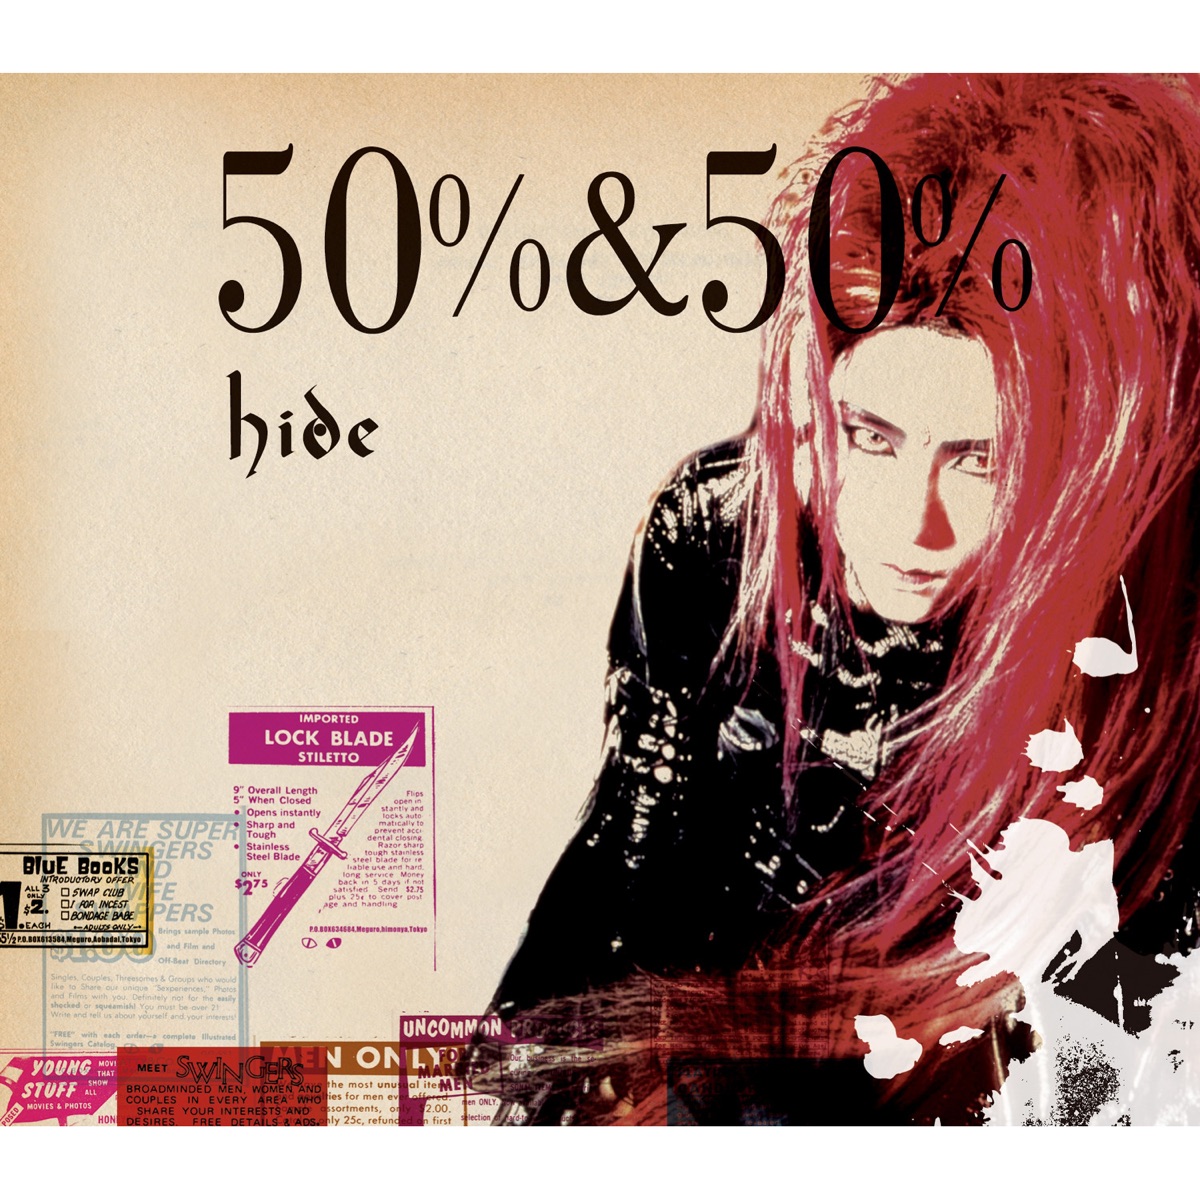 We Love Hide-The Best In the World - Album by hide - Apple Music